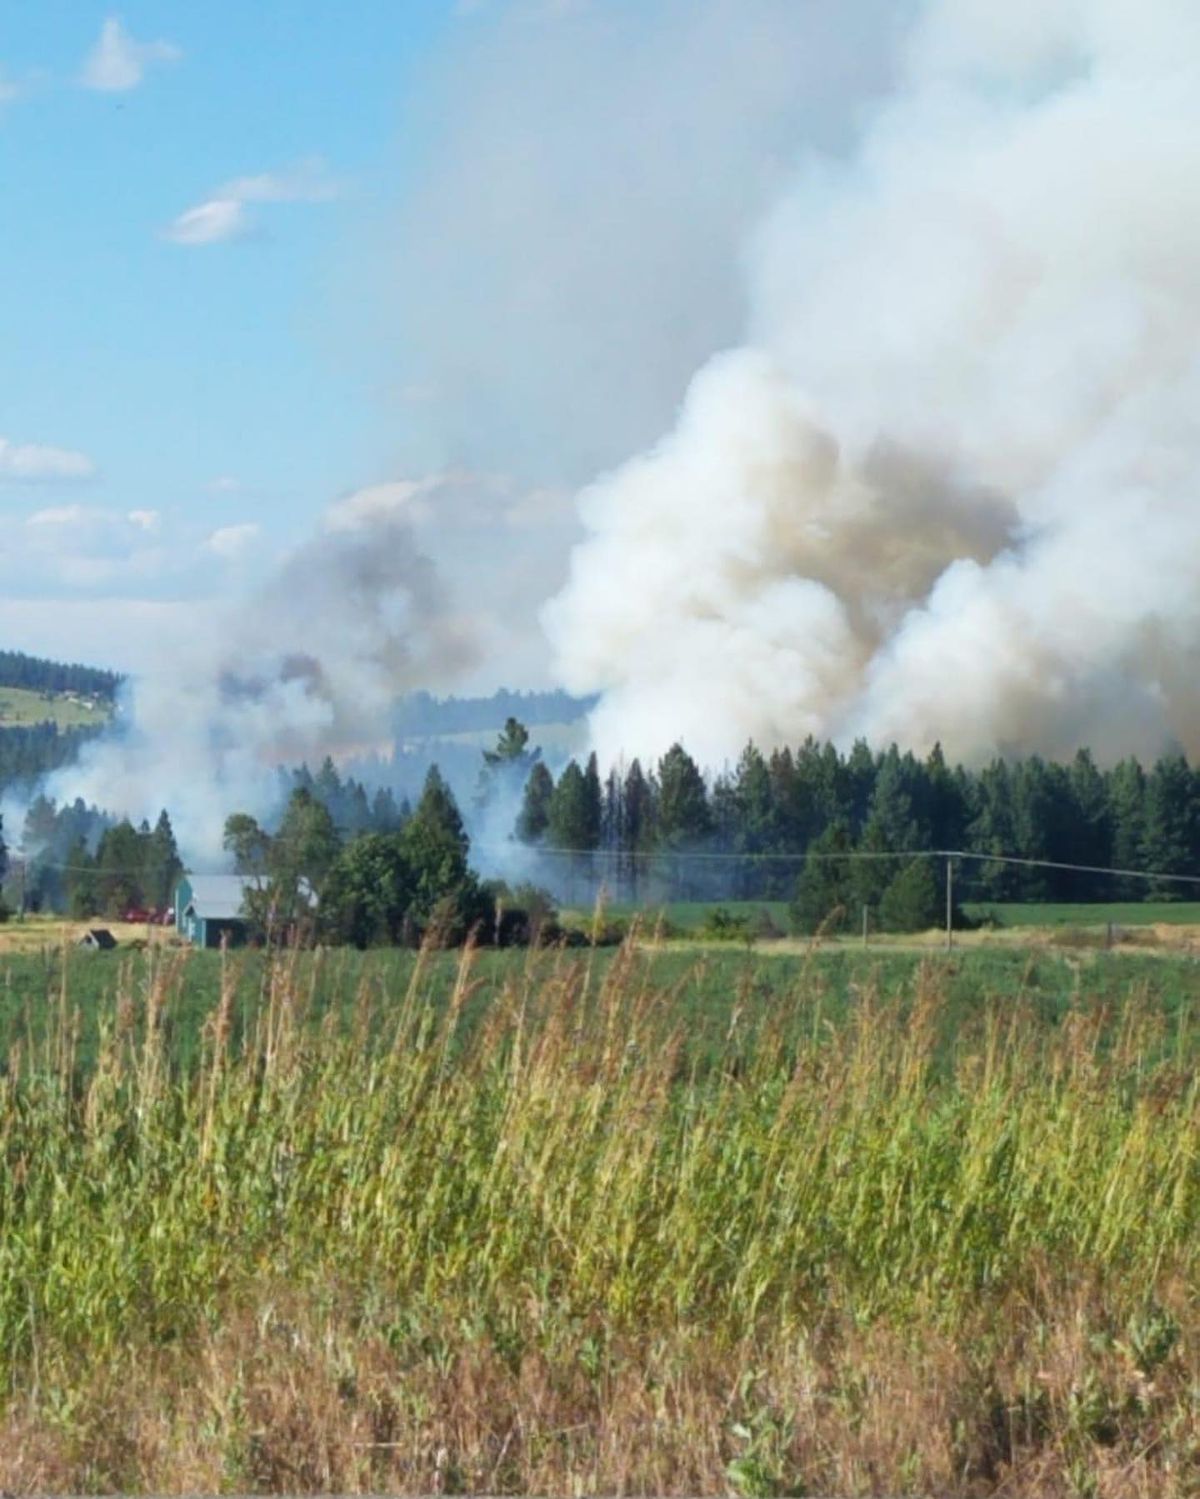 Smoke from brush fires in the Mica area in Spokane Valley can be seen on Friday. Multiple agencies cooperated in putting out brush fires near state Route 27 stretching from south of Freeman to Dishman-Mica Road. (Courtesy of SVFD Facebook page)